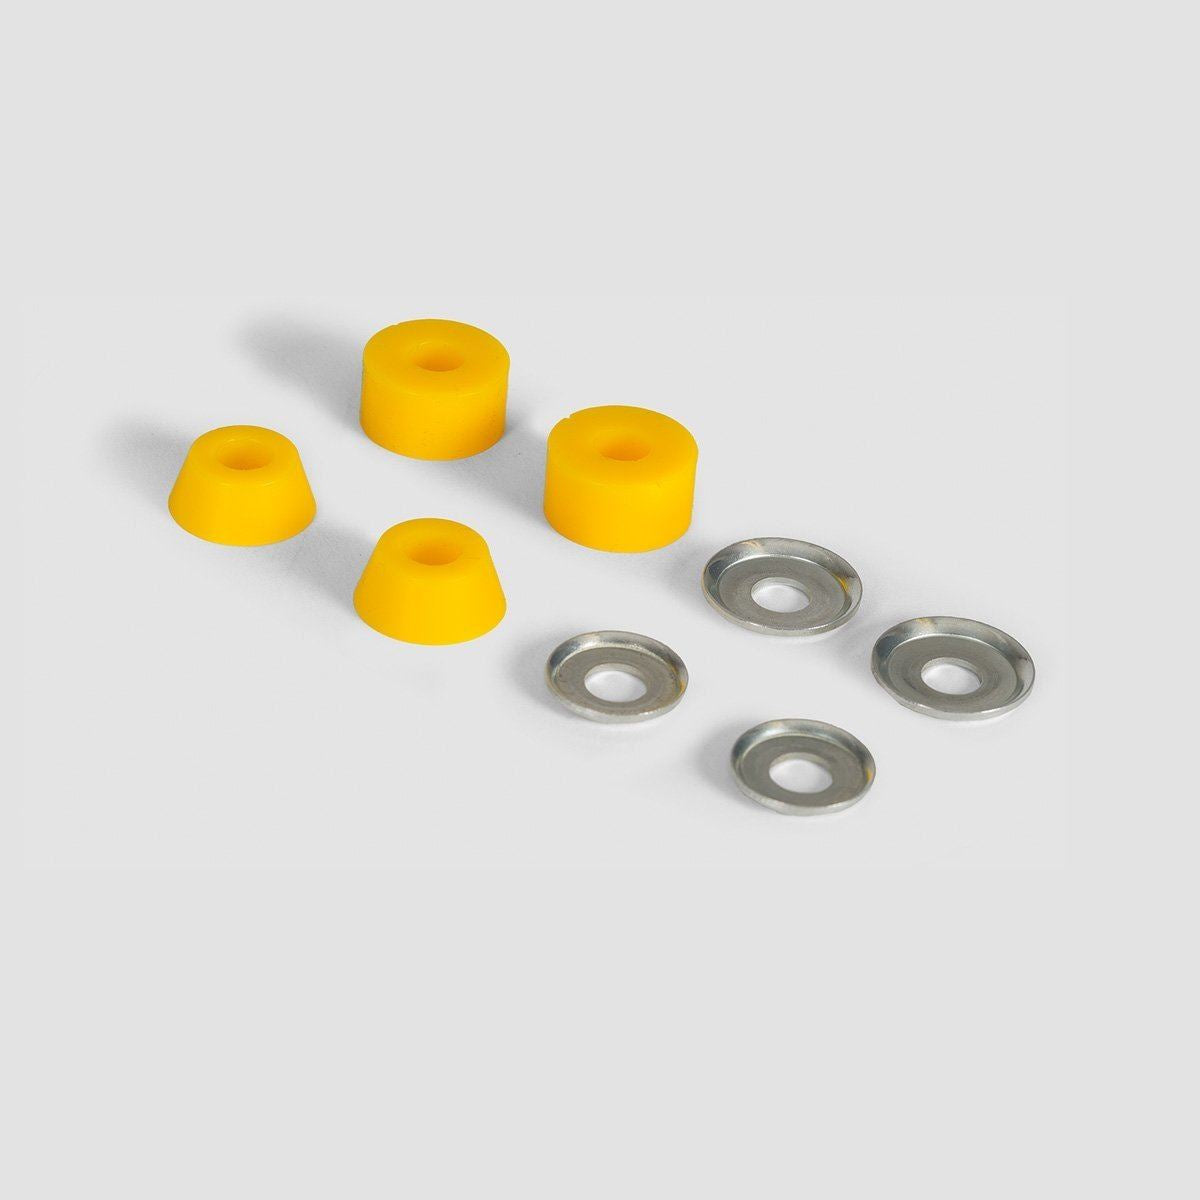 Independent Standard Cylinder Super Hard 96a Bushings Yellow